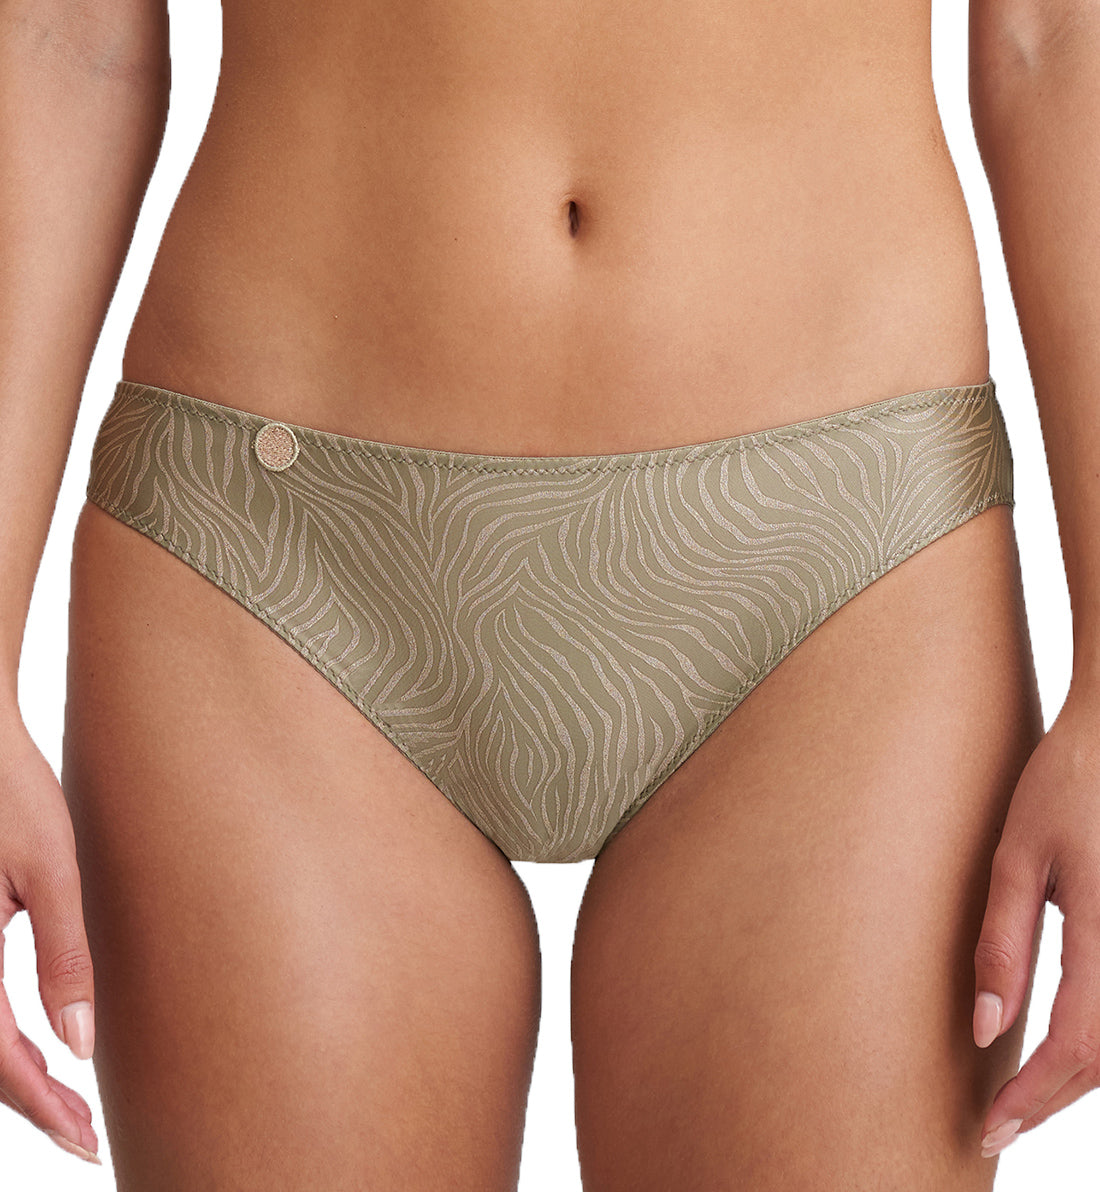 Marie Jo Tom Matching Rio Brief (0520820),Small,Golden Olive - Golden Olive,Small